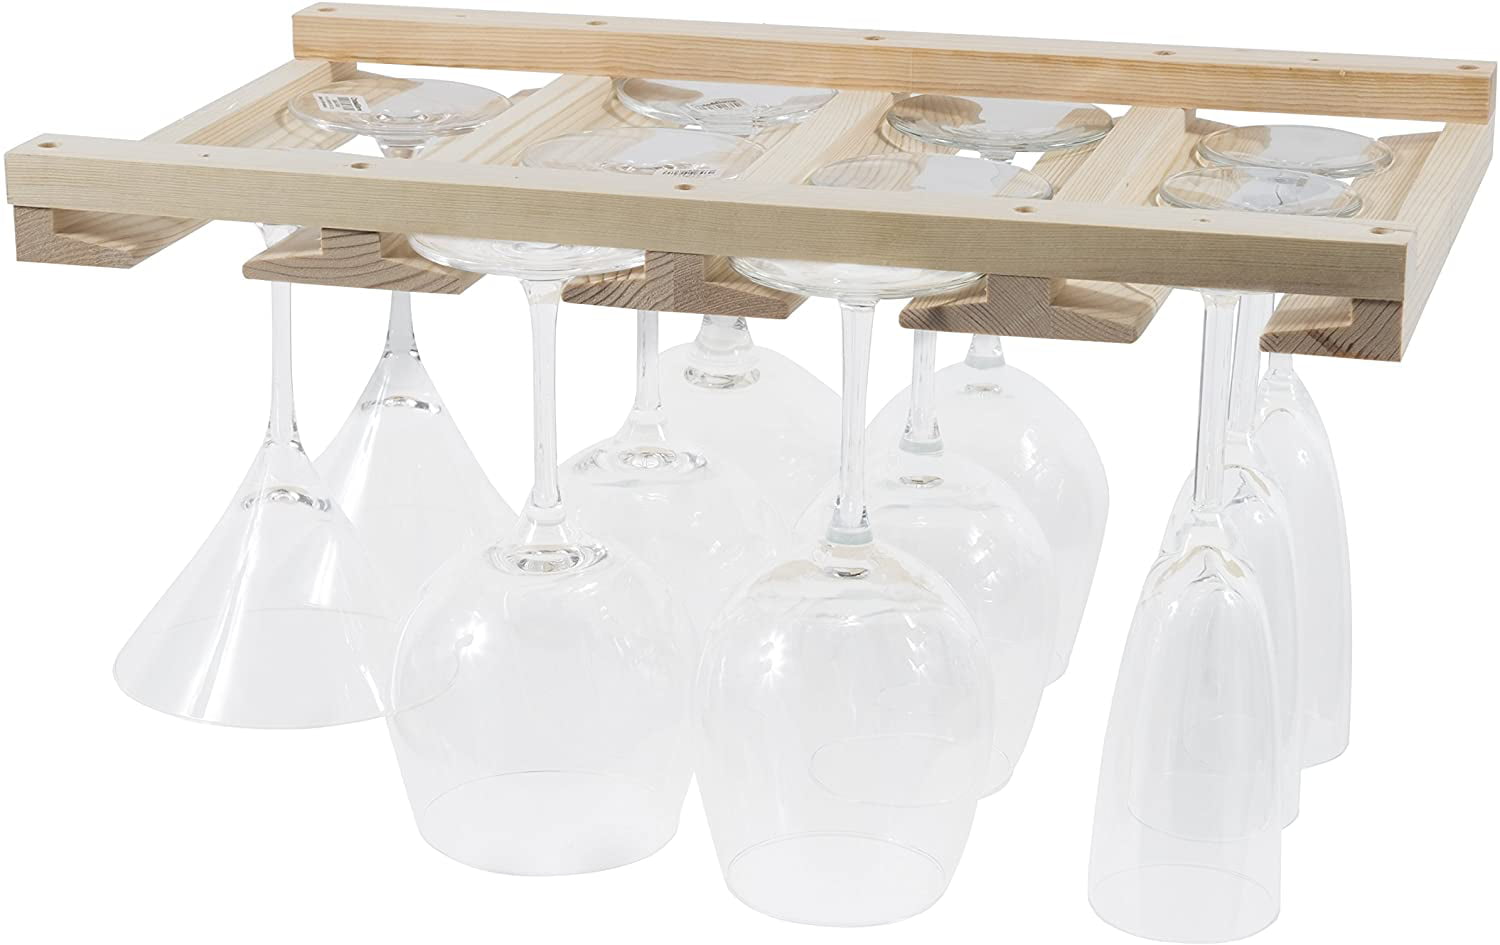 Natural Rustic State Stemware Wine Glass Rack Makes Dull Kitchens or Bar Looks Great Perfectly Fits 6-12 Glasses Under Cabinet Easy to Install with Included Screws Great Hanging Bar Glass Rack